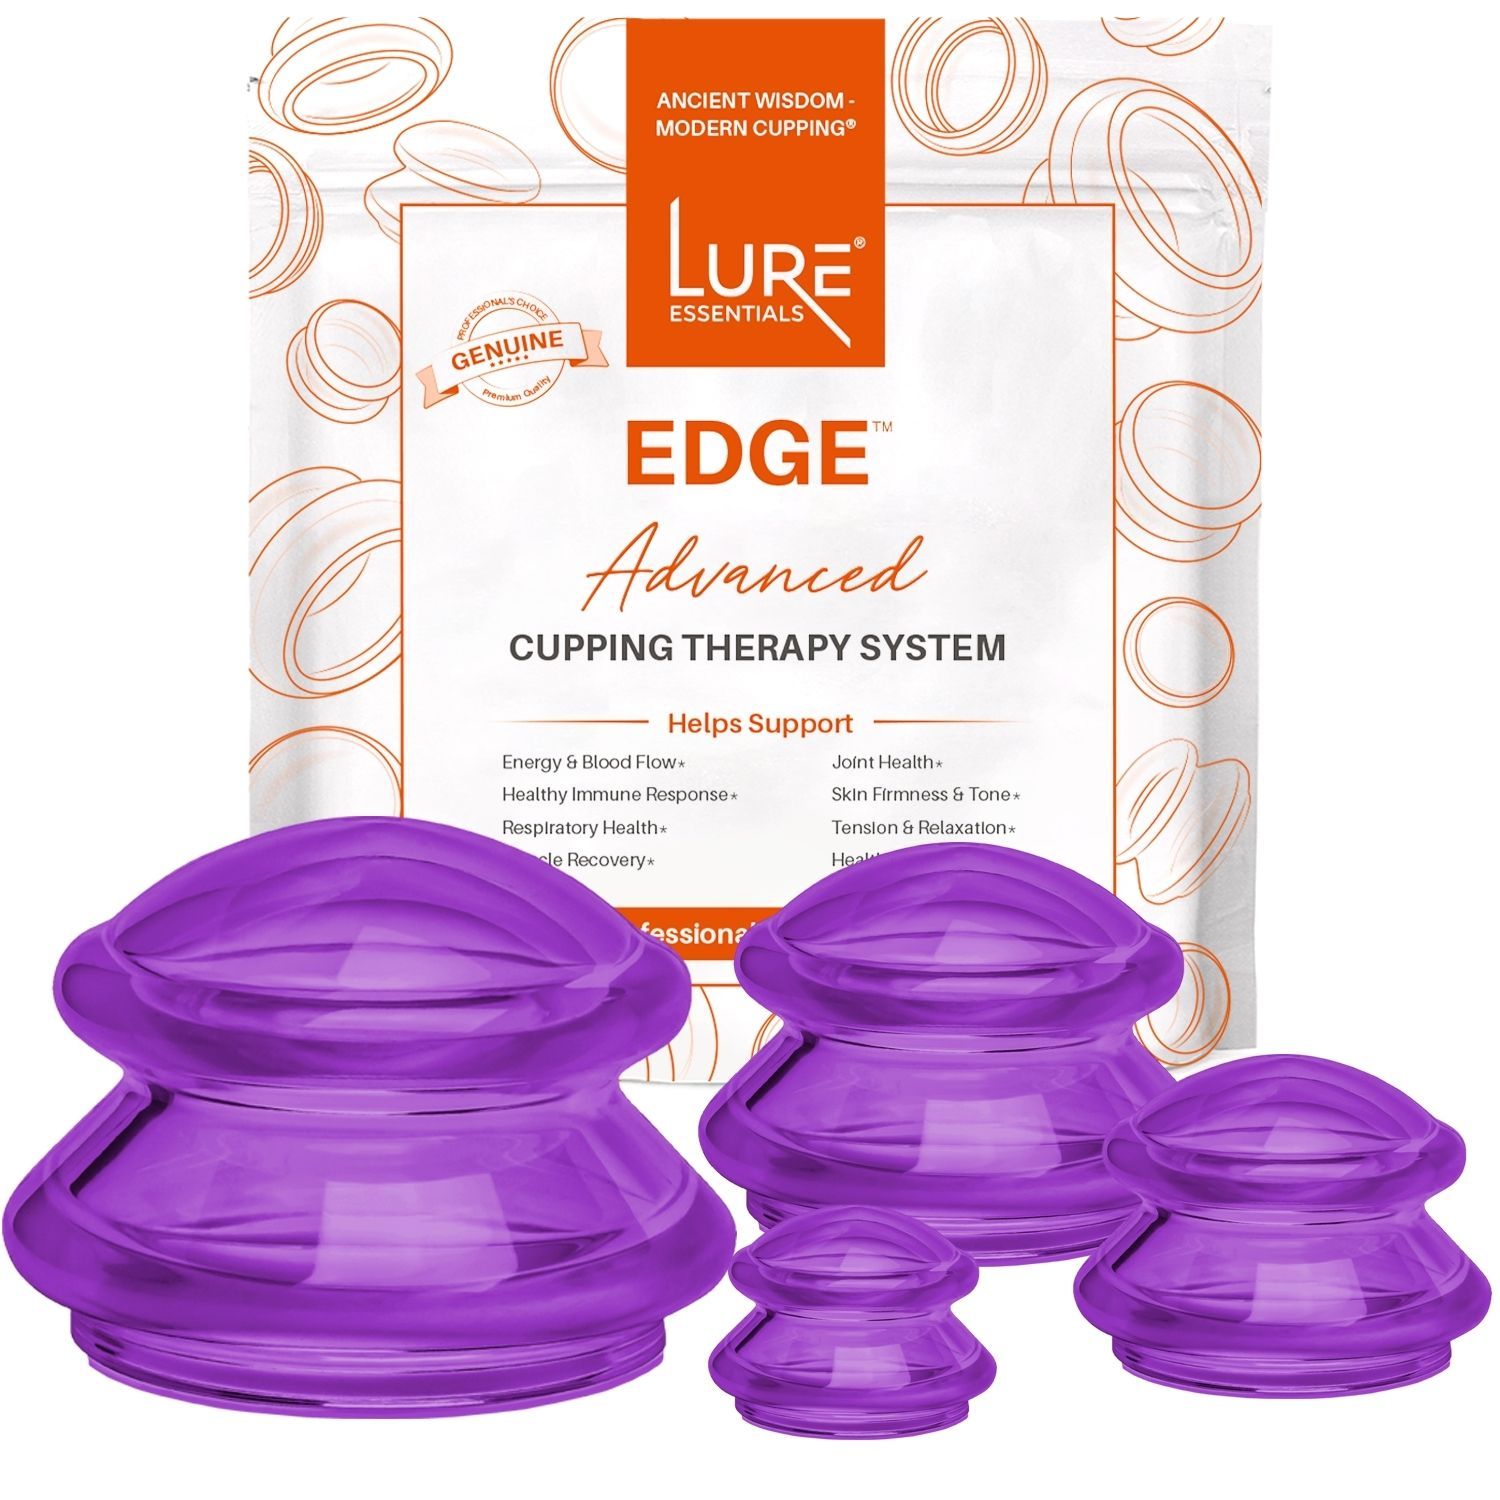  LURE Essentials Edge Cupping Therapy Set - Cupping